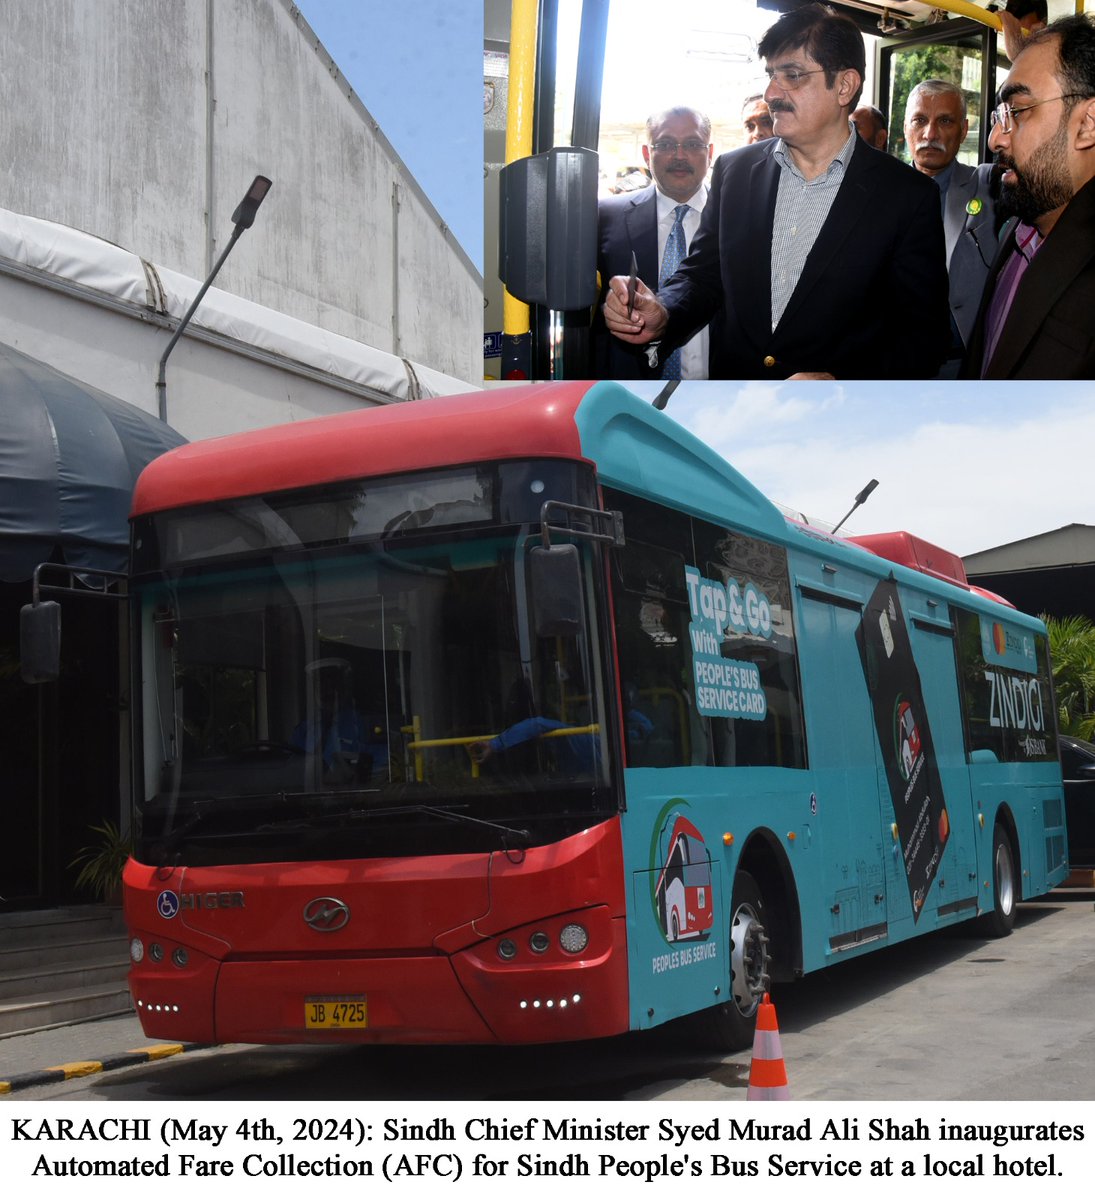 KARACHI (May 4th, 2024): Sindh Chief Minister Syed Murad Ali Shah inaugurated Automated Fare Collection (AFC) for Sindh People's Bus Service with a Fare Smartcard and by boarding the bus after punching the card. ❤❤       #PPPDigitalTharparkar       @BBhuttoZardari